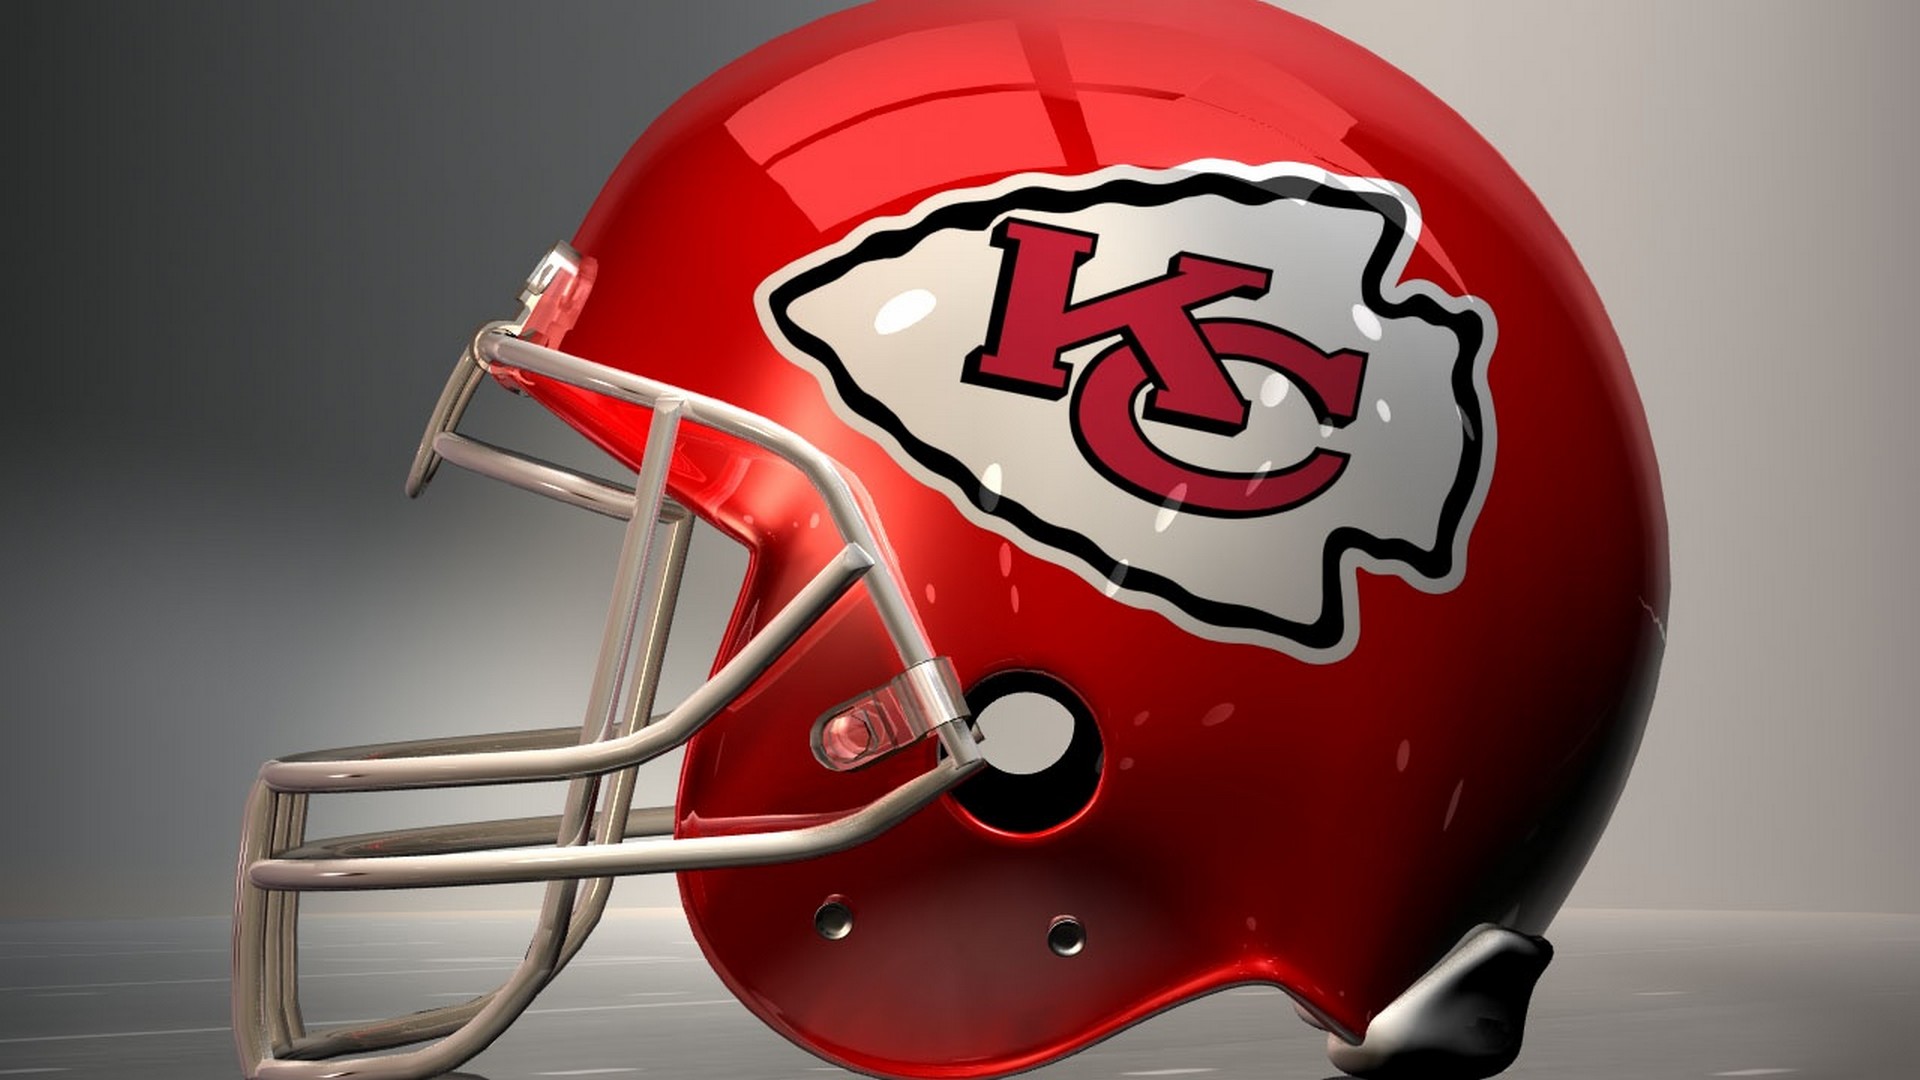 Wallpapers HD Kansas City Chiefs NFL with high-resolution 1920x1080 pixel. You can use this wallpaper for your Mac or Windows Desktop Background, iPhone, Android or Tablet and another Smartphone device